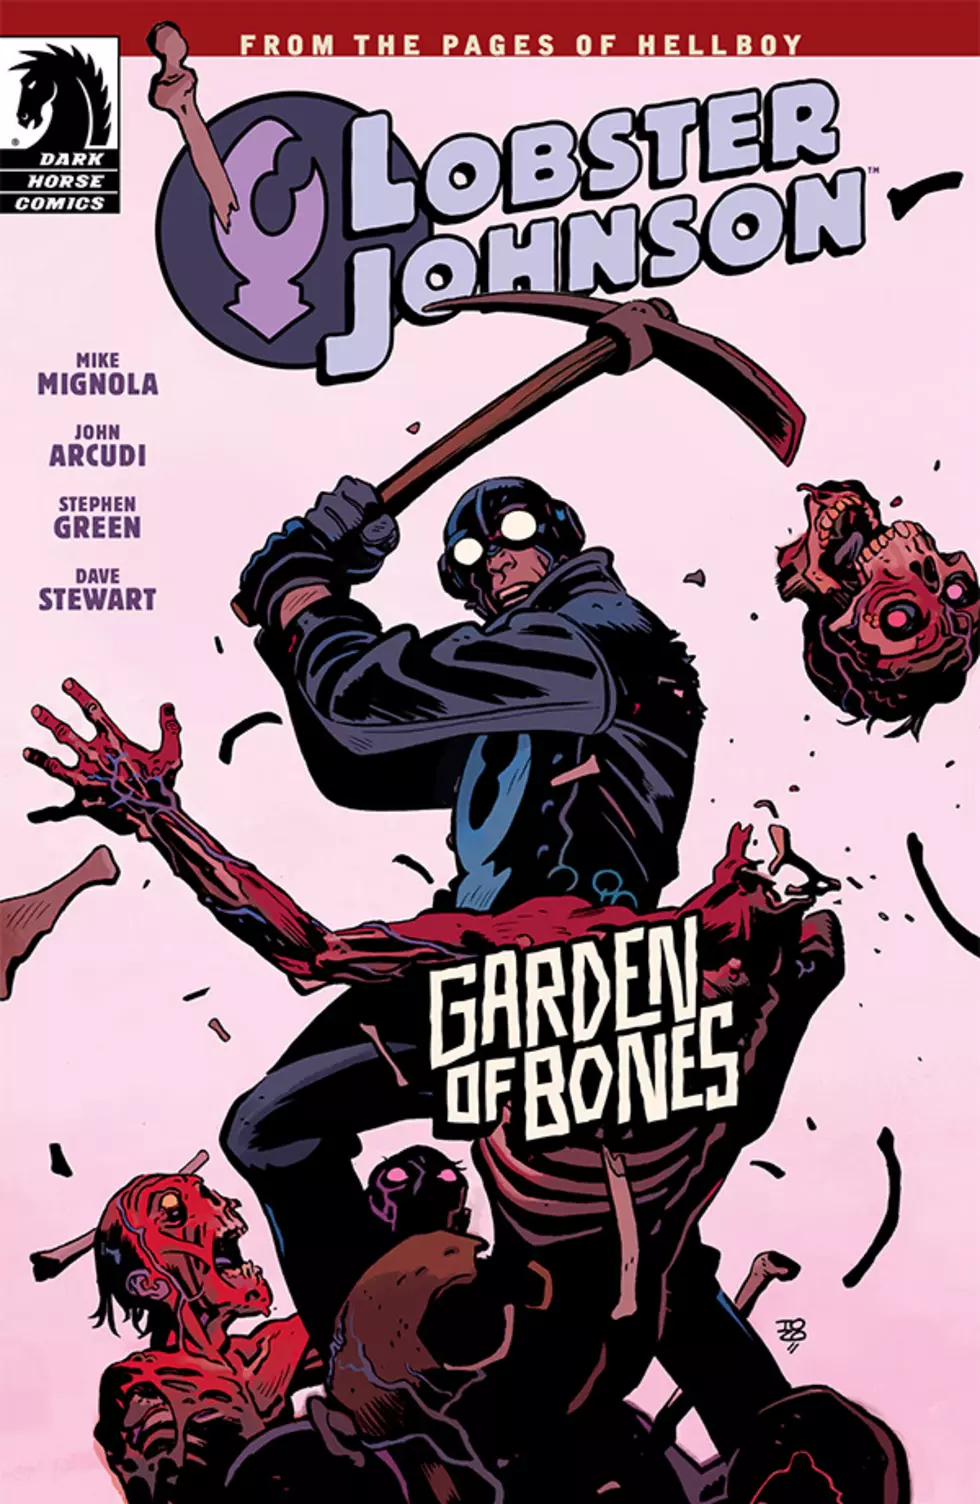 A Zombie Gangster Is On The Prowl In &#8216;Lobster Johnson: Garden Of Bones&#8217; [Exclusive Preview]